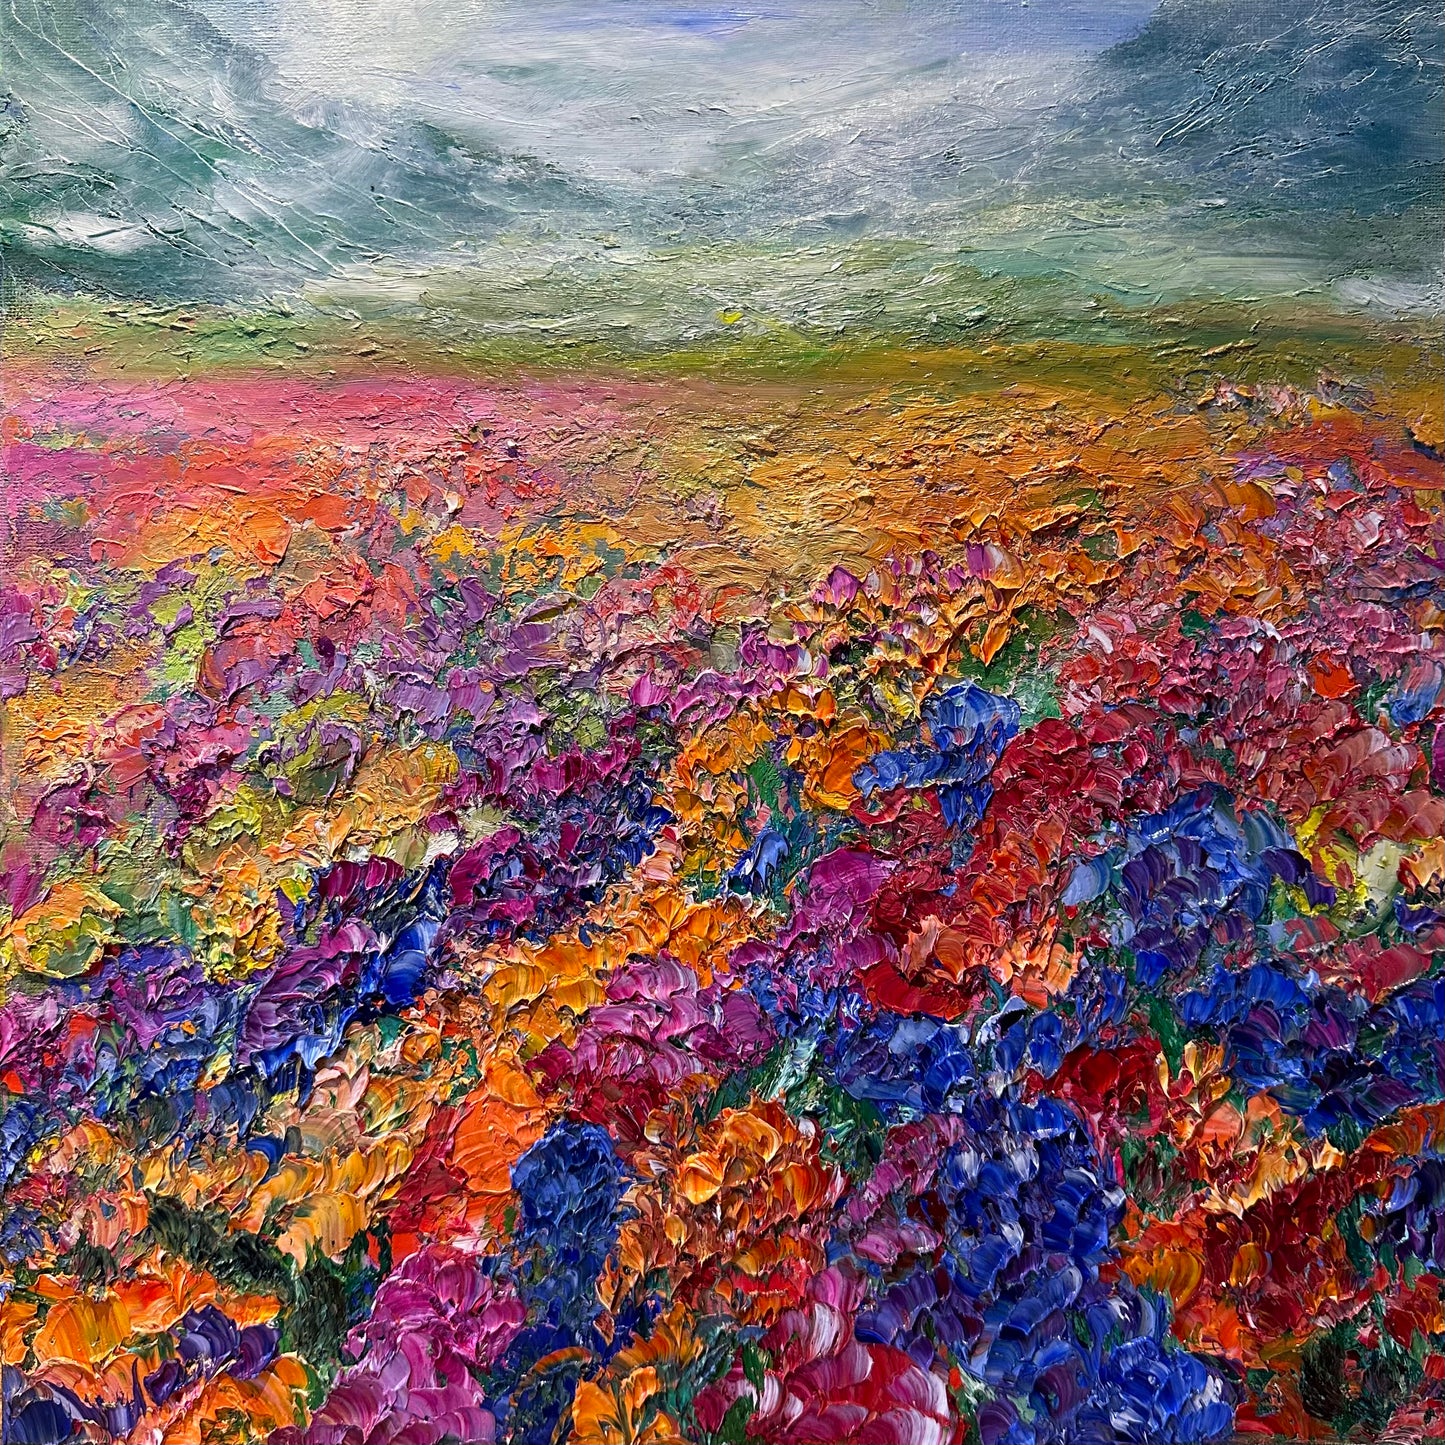 Oil Painting of a flower field in a storm.